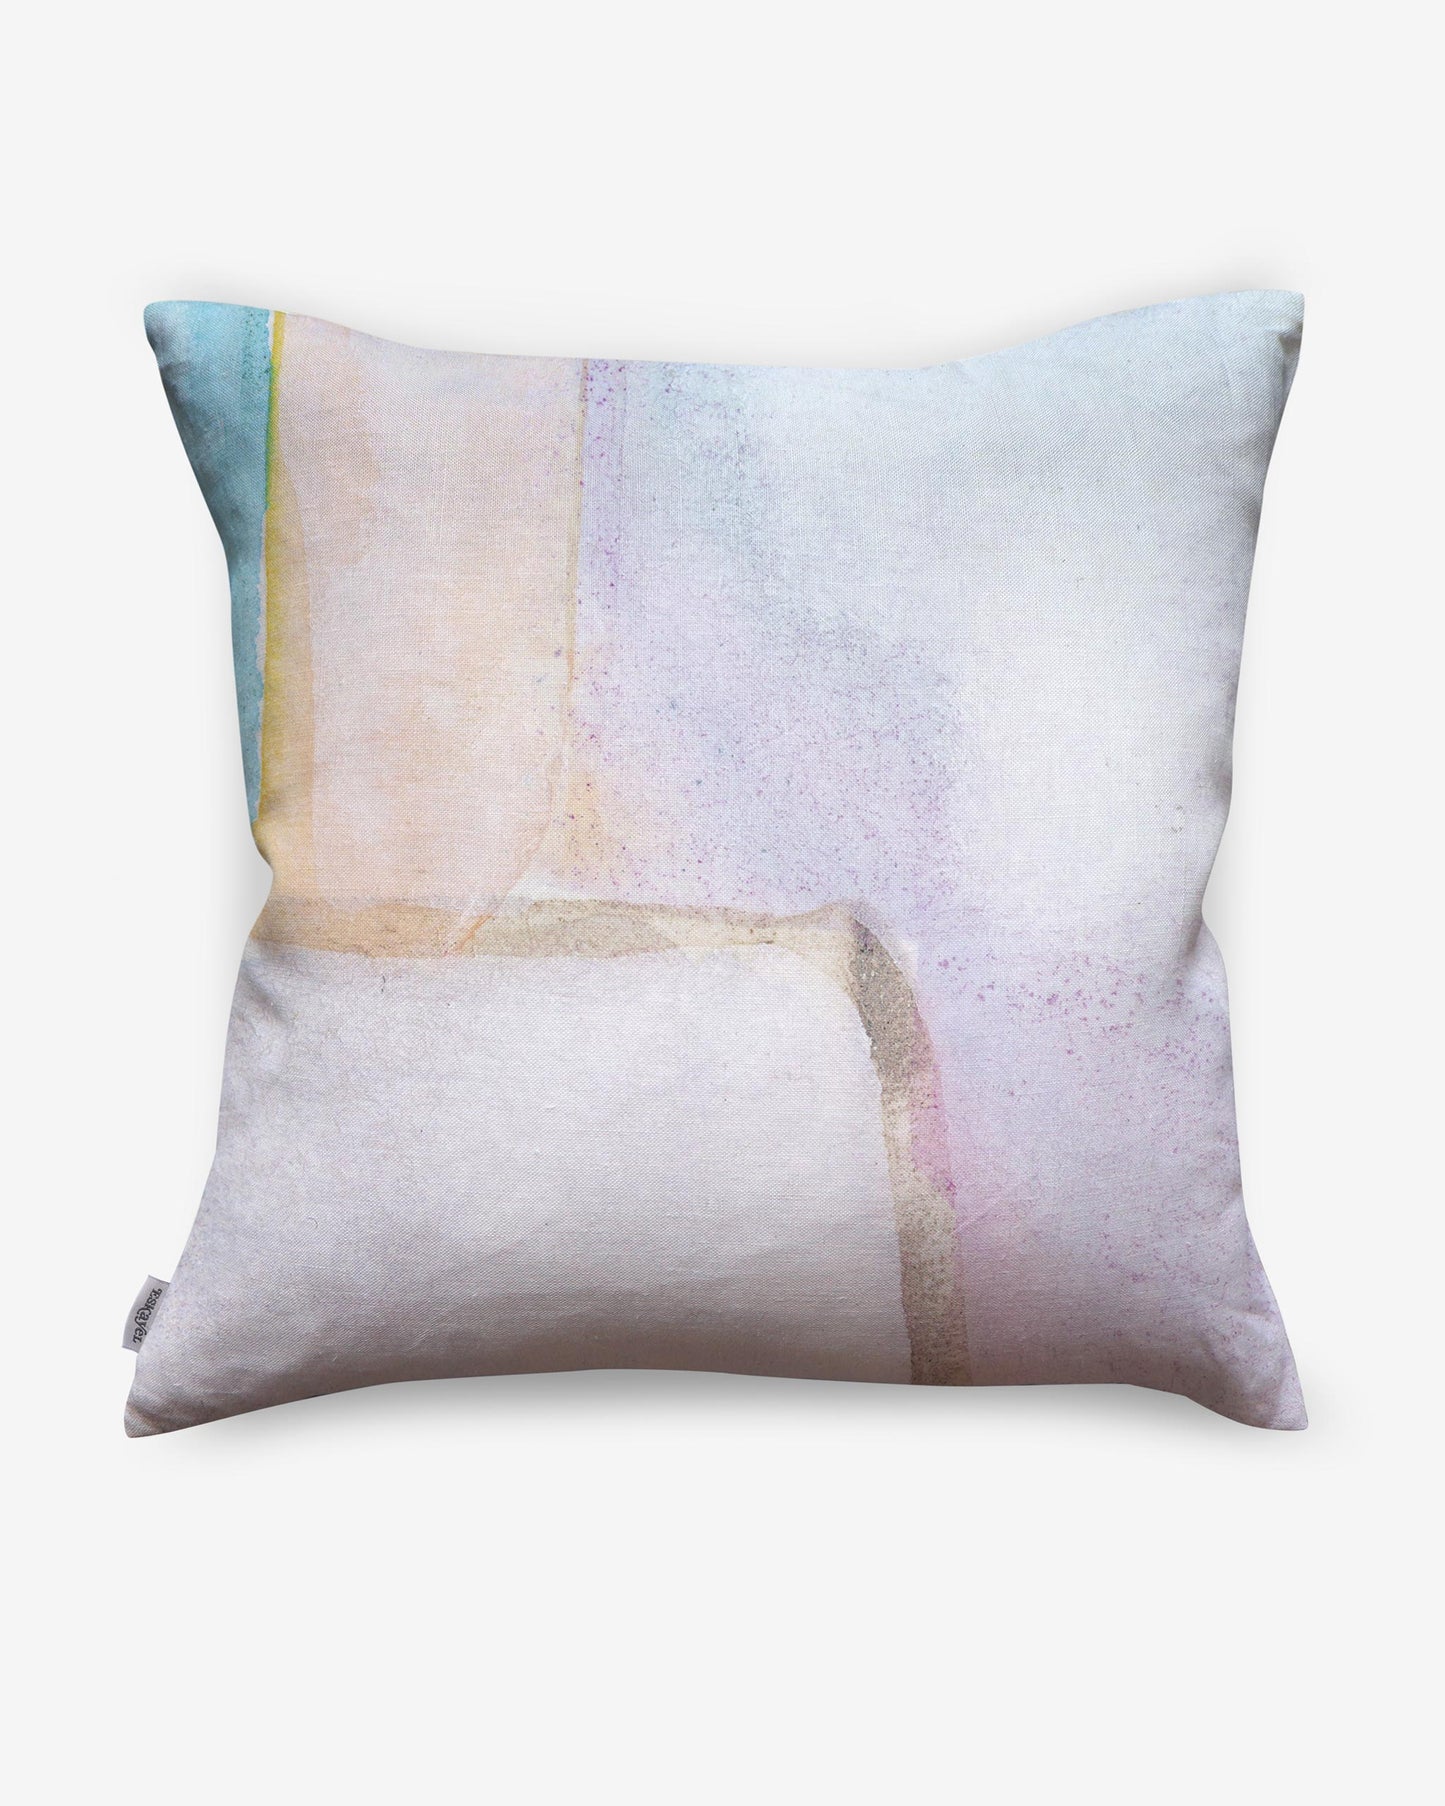 A pillow with Portico Three, a watercolor painting by Eskayel studio on it